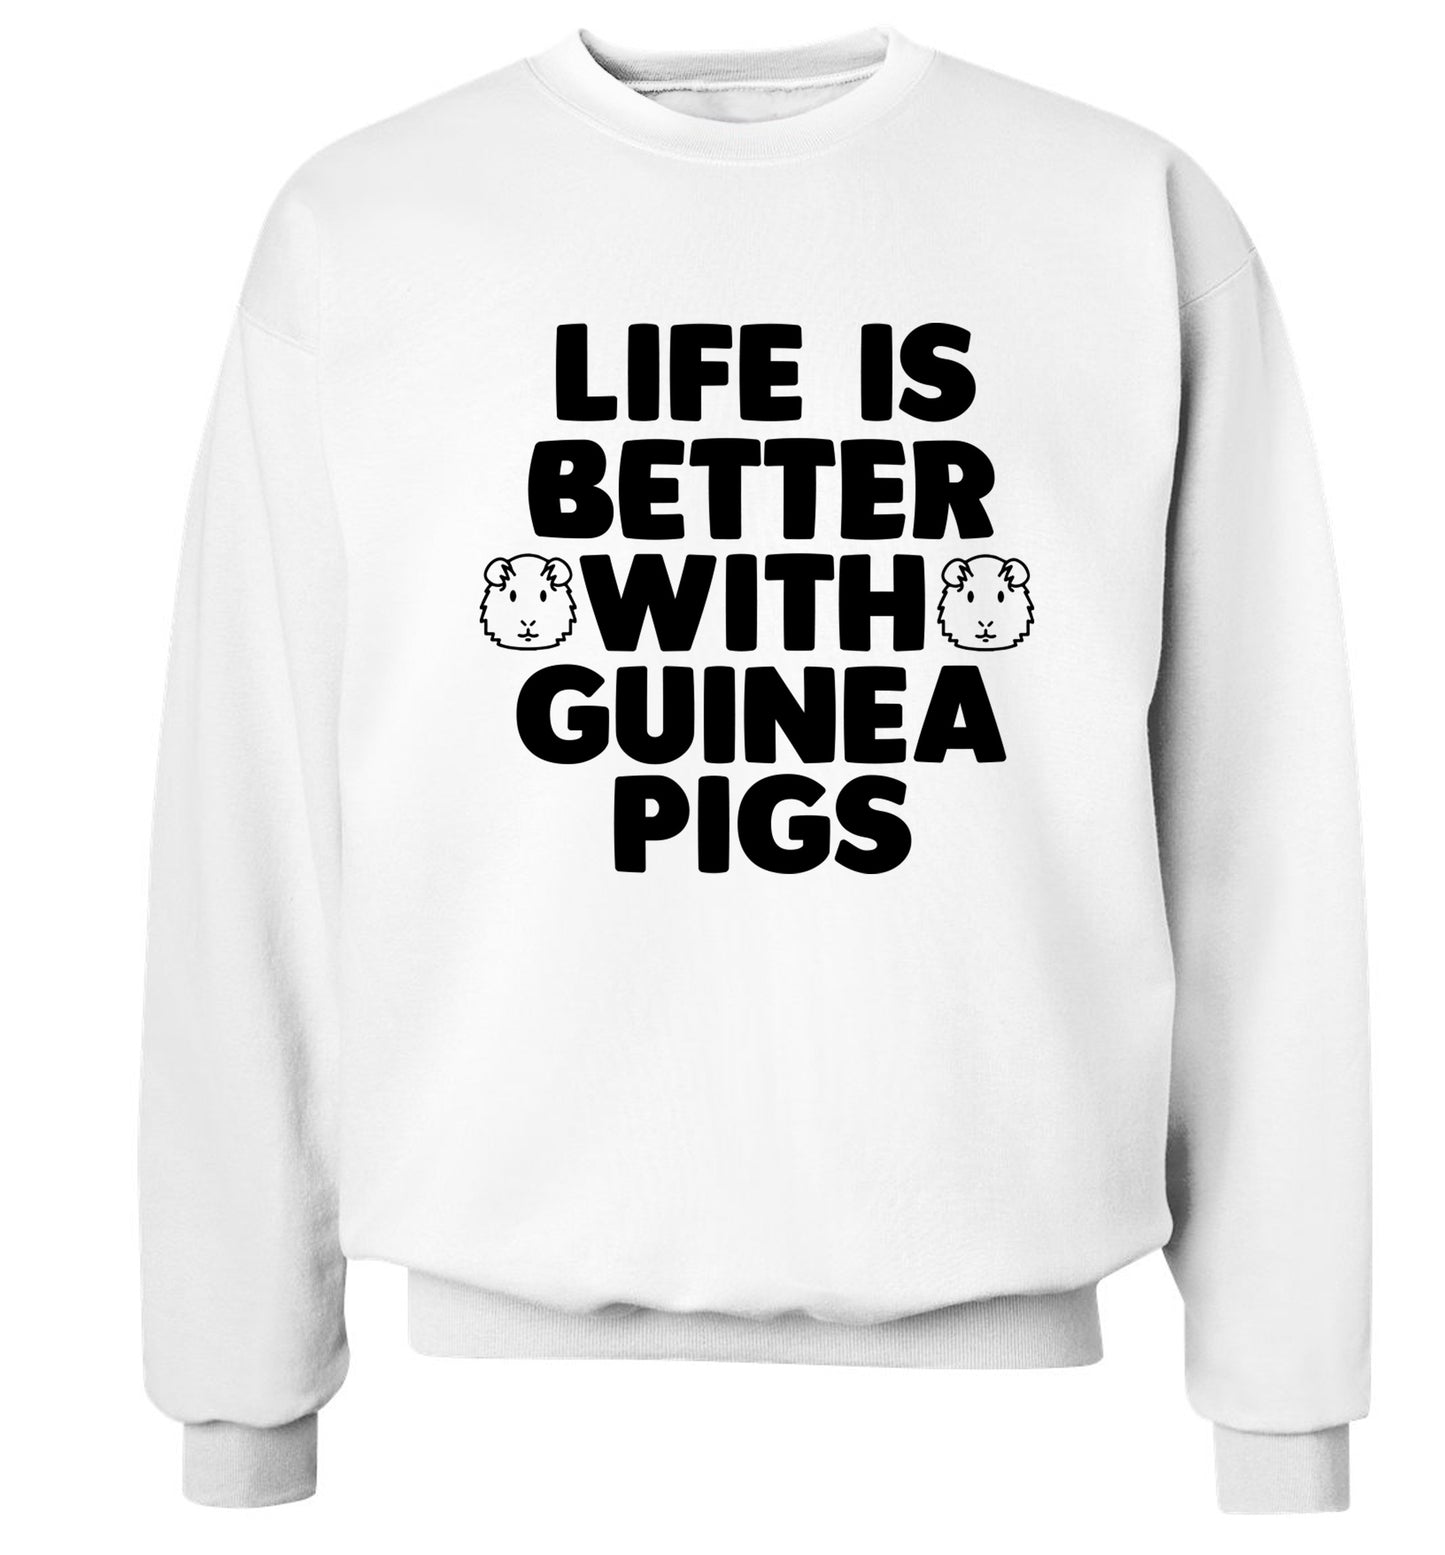 Life is better with guinea pigs Adult's unisex white  sweater 2XL